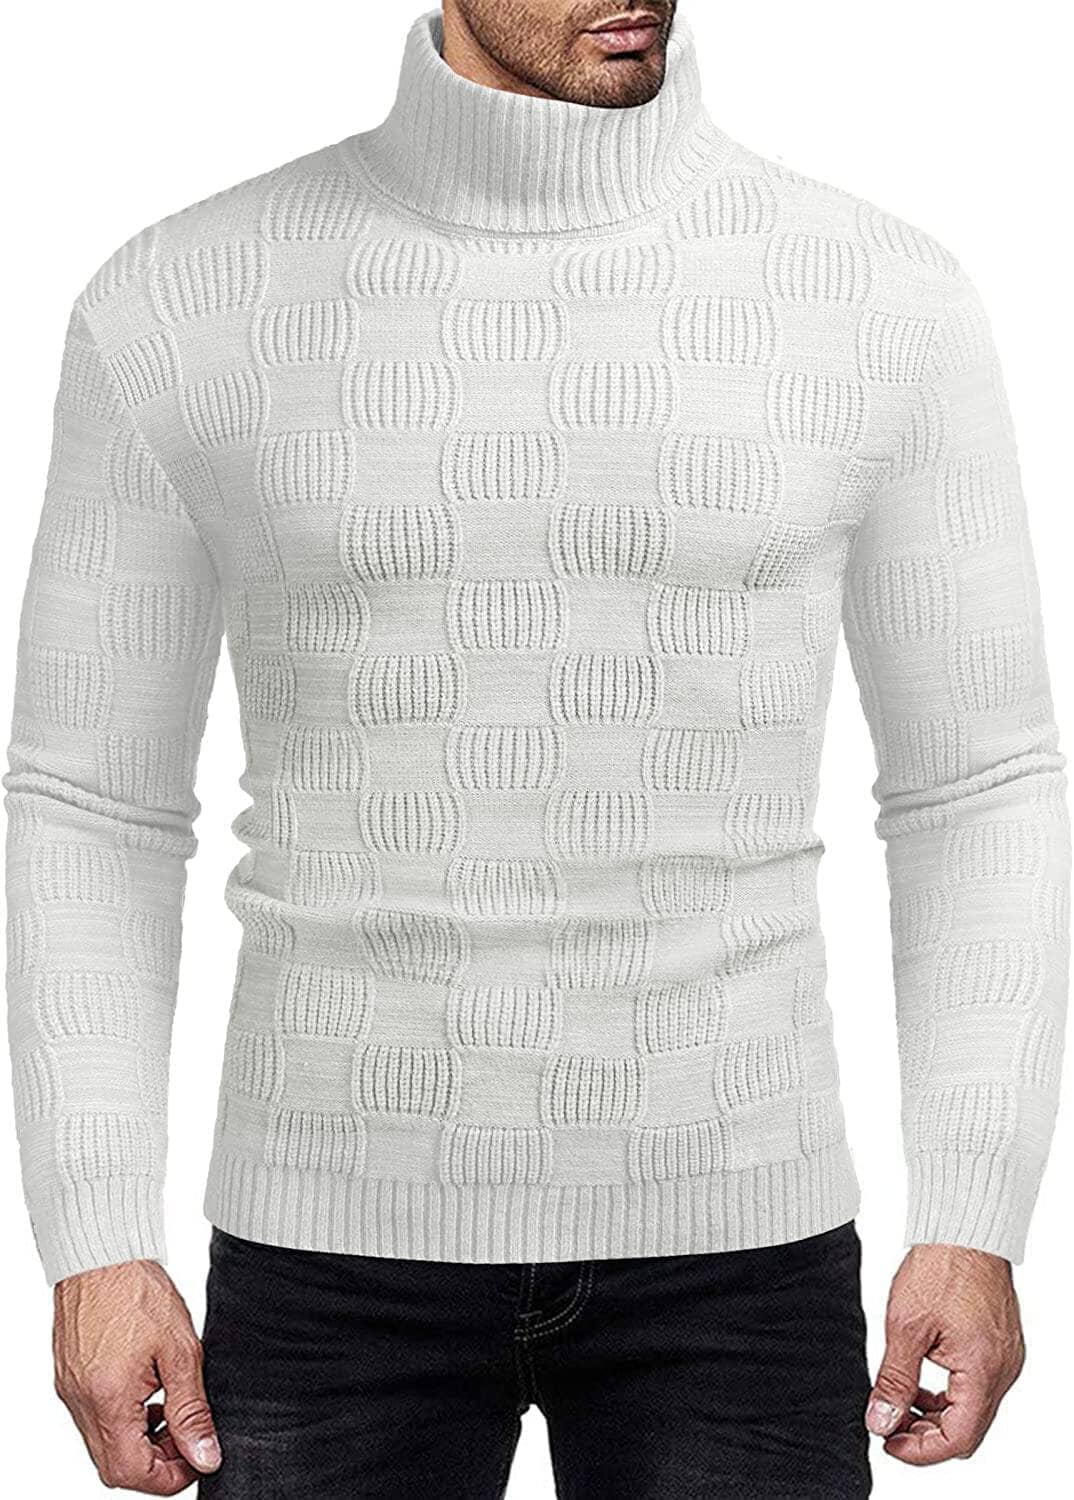 Men's Knitted Turtleneck Sweater Plaid Hightneck Long Sleeve Sweater (US Only) Sweaters COOFANDY Store White S 